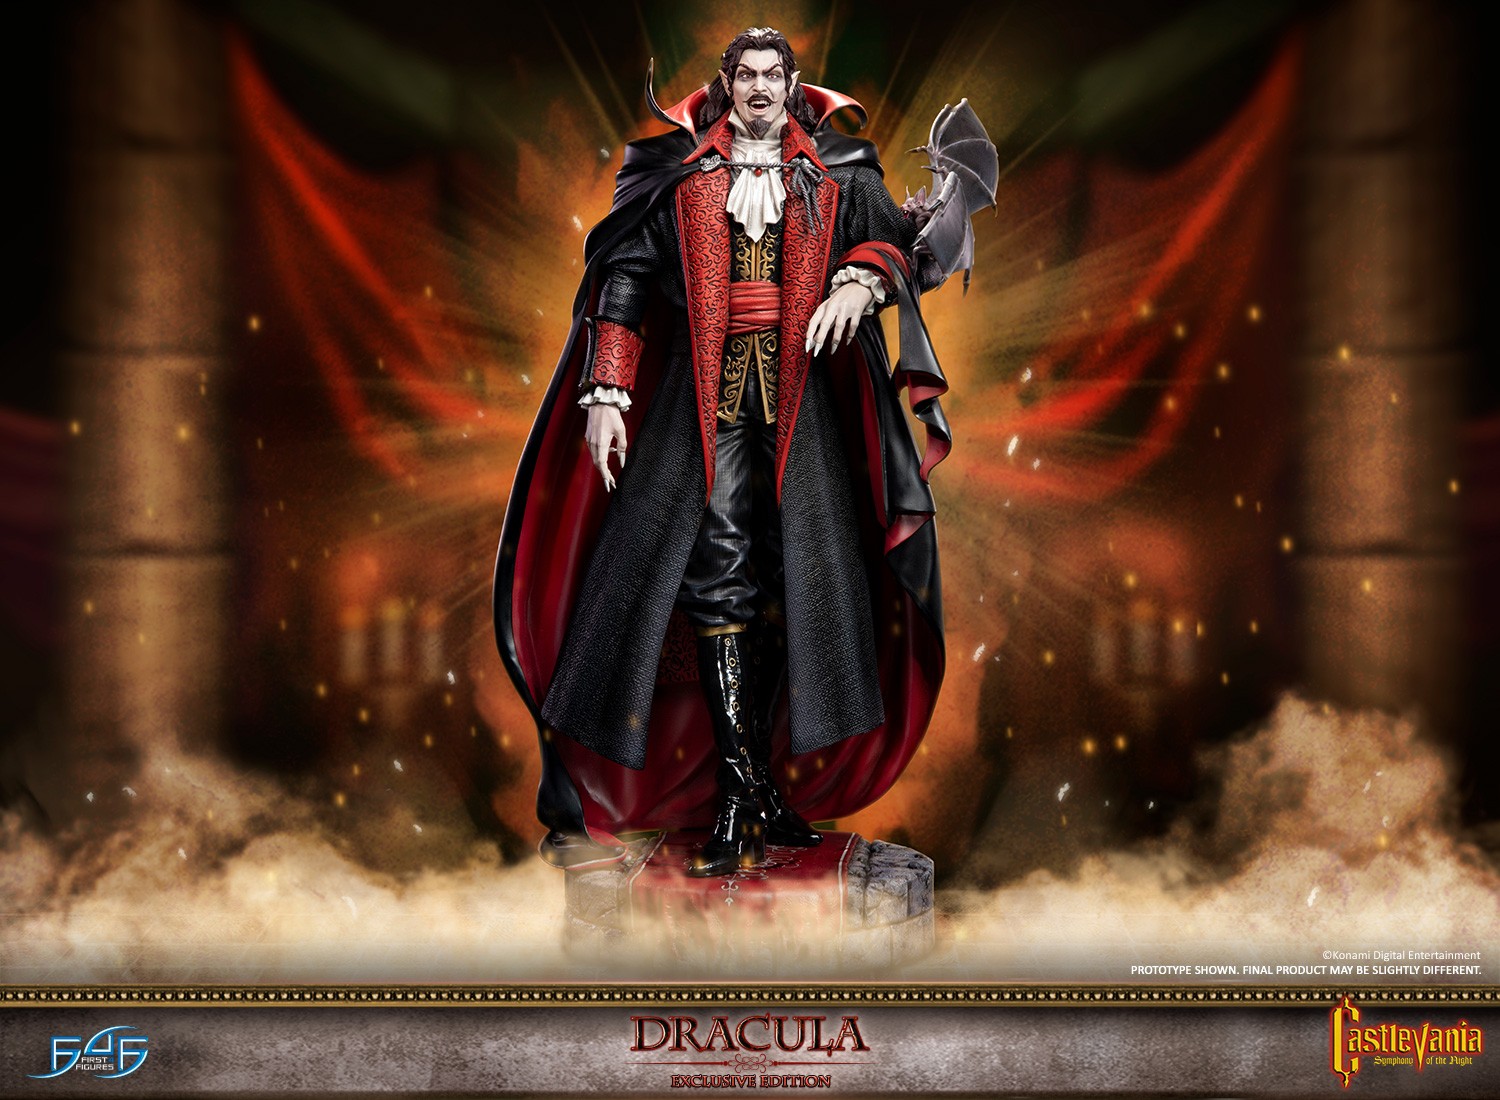 Castlevania: Symphony of the Night - Dracula Exclusive Edition